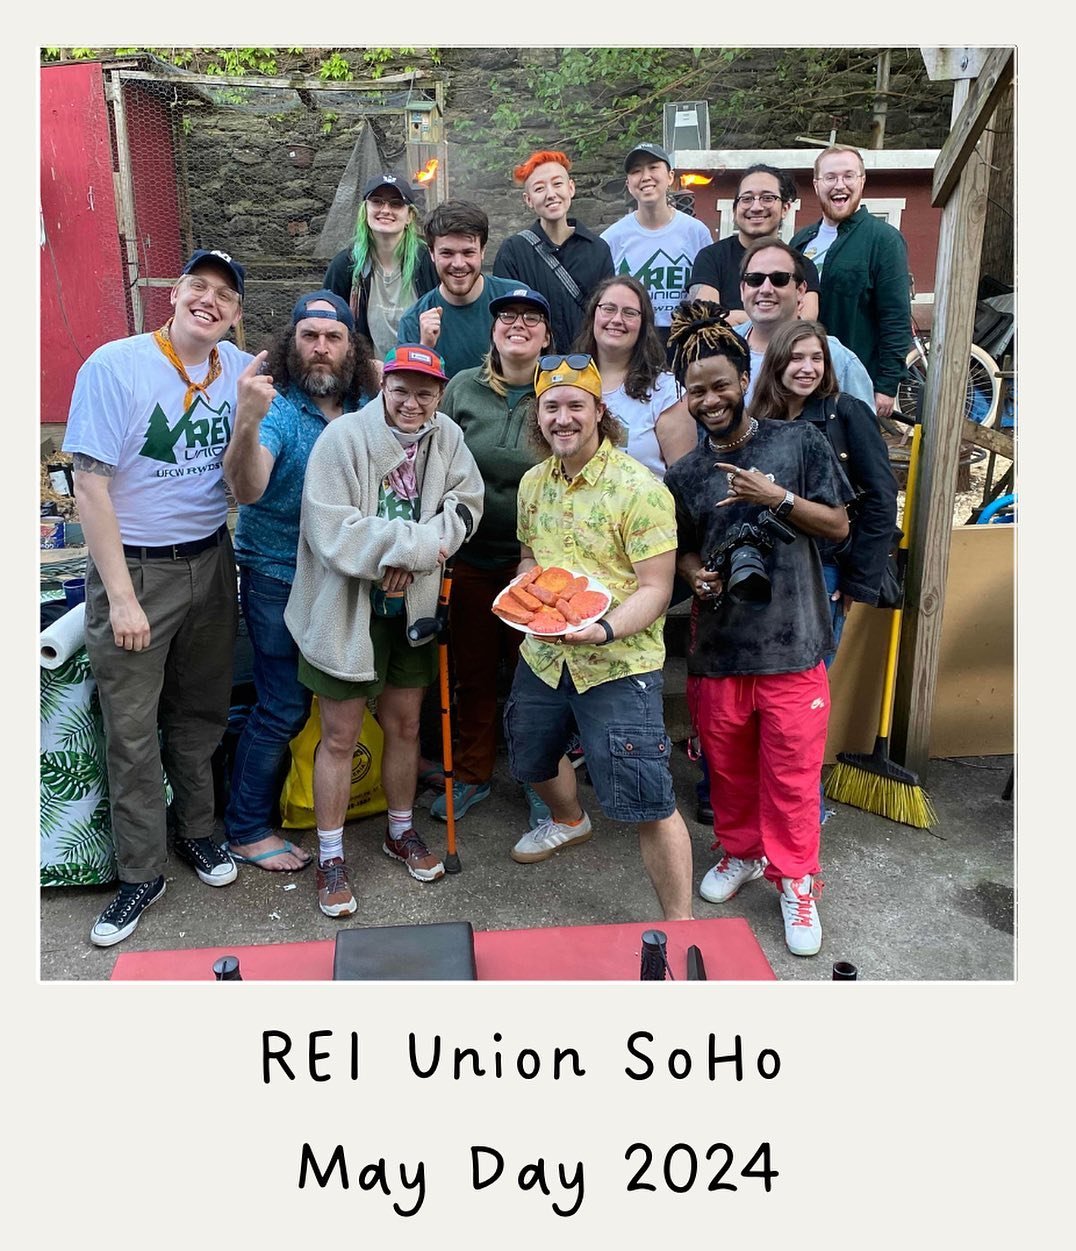 REI Union SoHo celebrating May Day the only way we know how: in community with each other! #MayDay2024